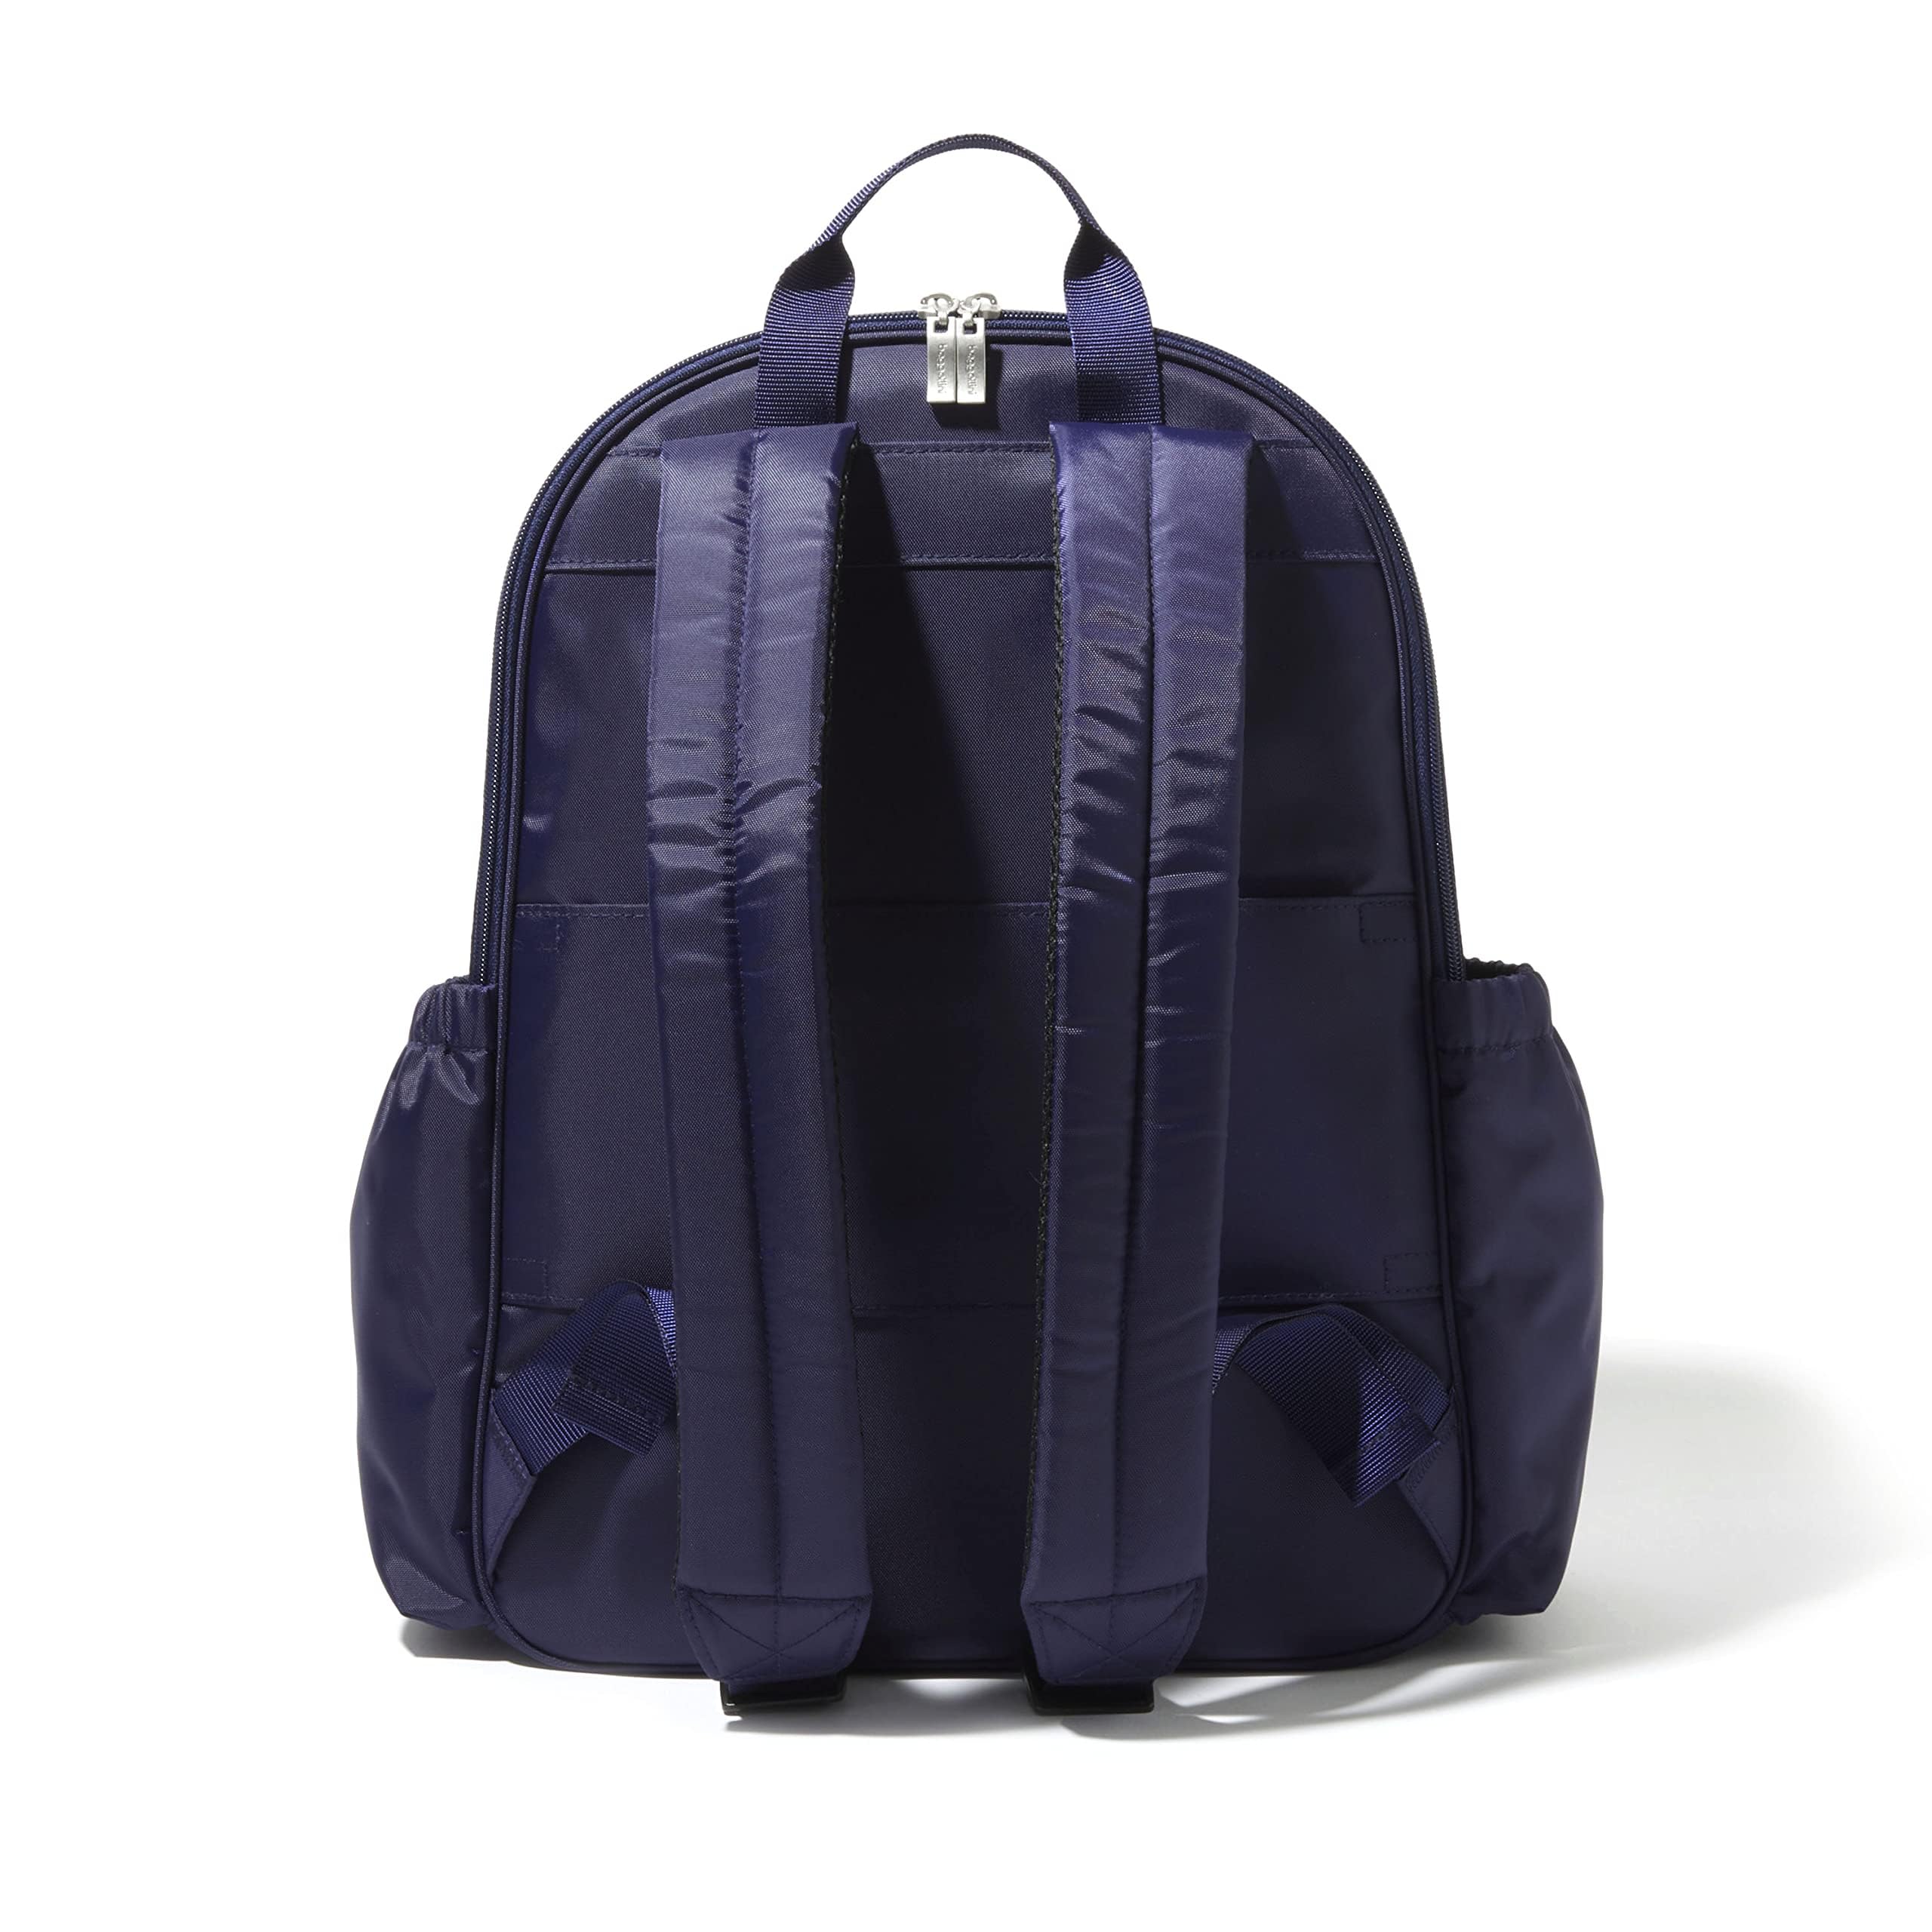 Baggallini Womens Essential Laptop Backpack, Cadet Navy